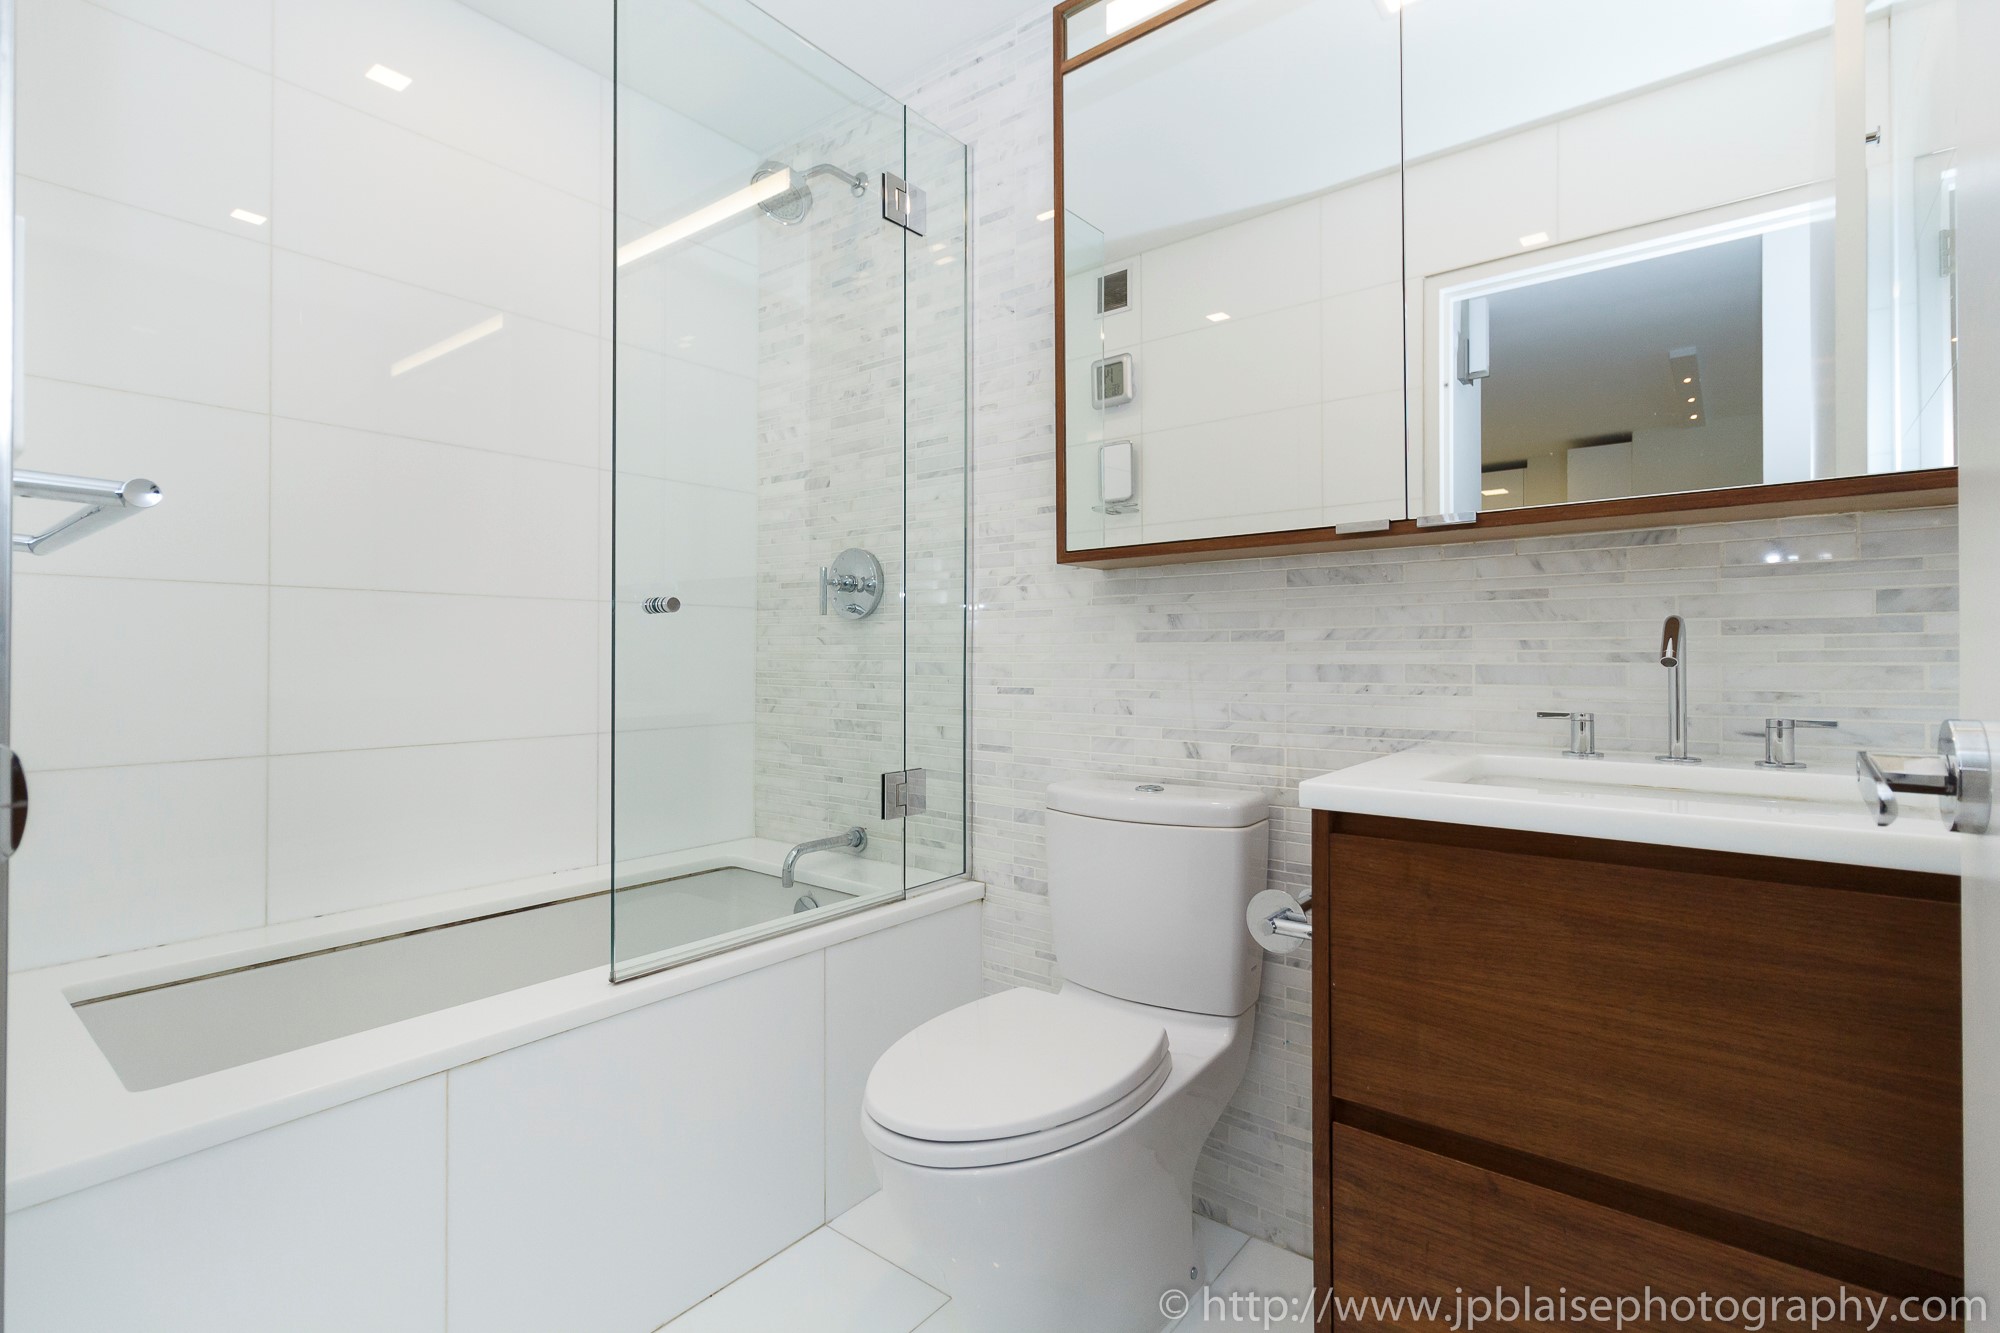 New york city apartment photographer ny nyc real estate interior photography midtown west bathroom